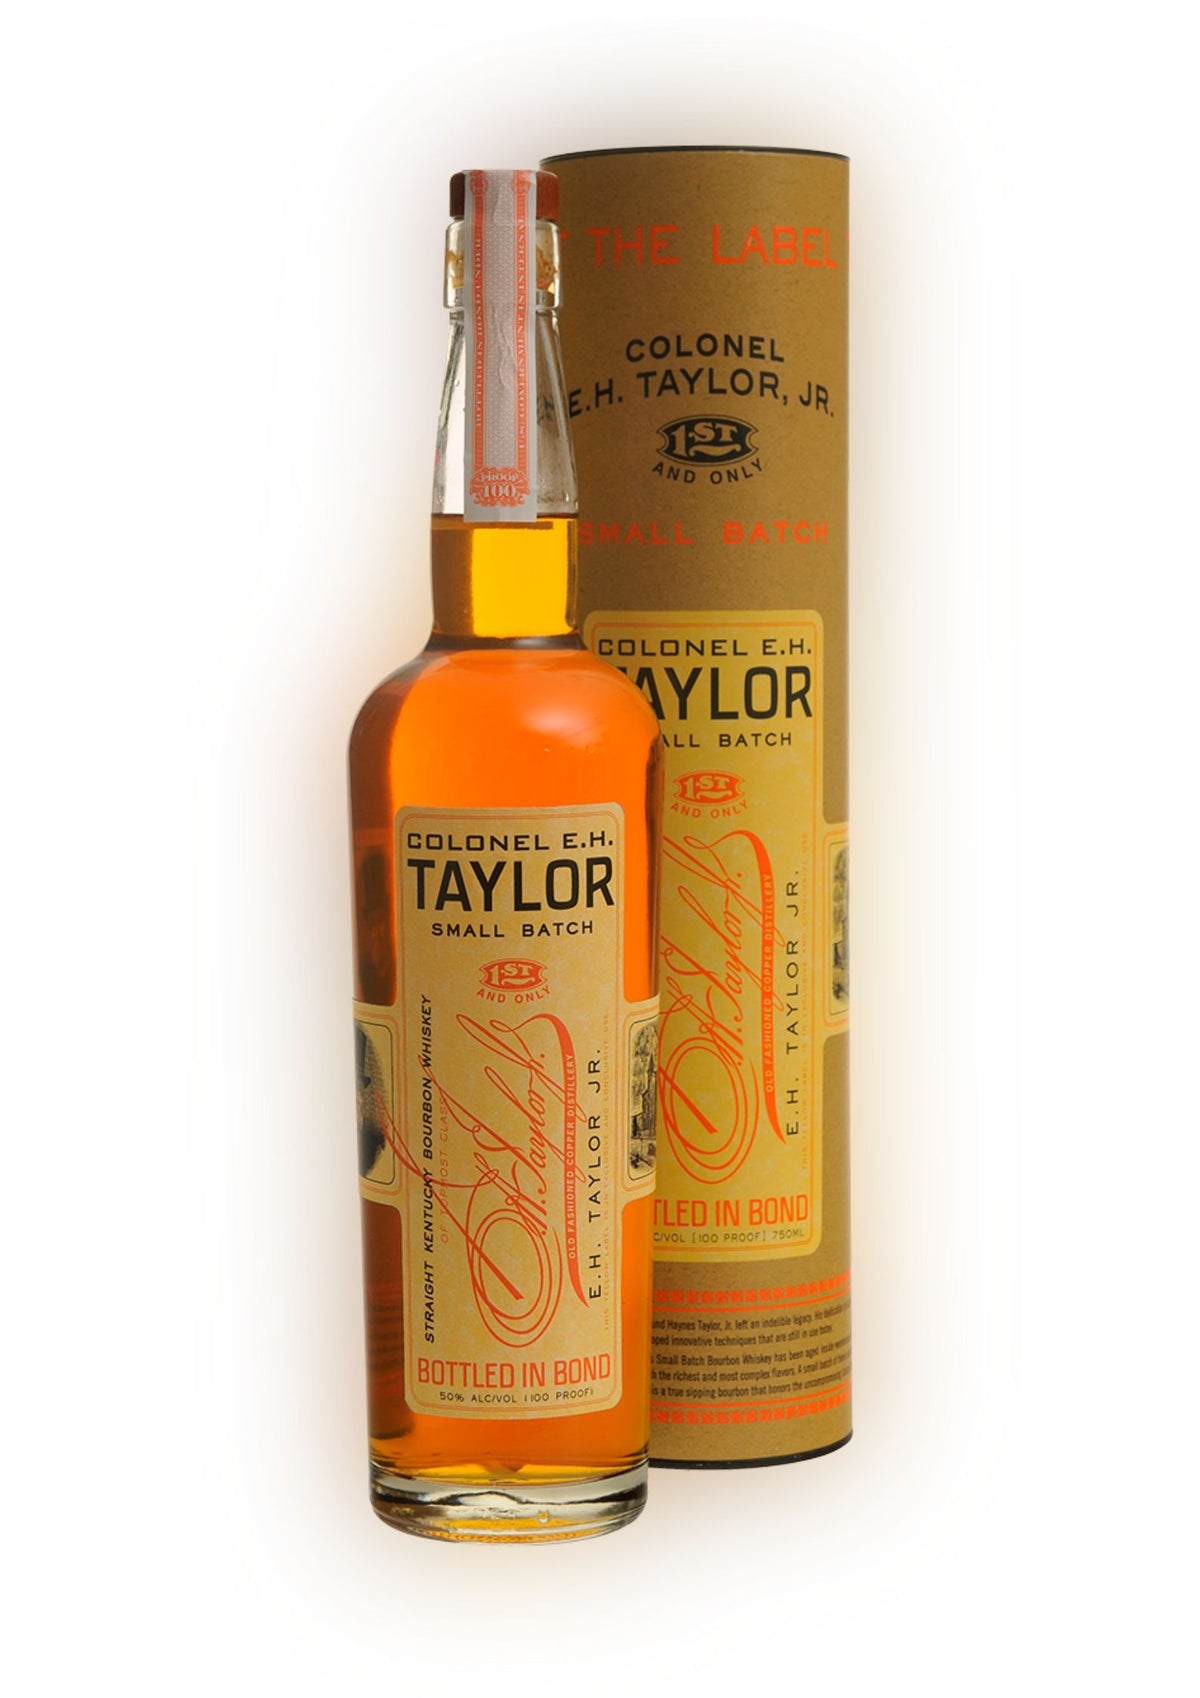 Colonel E.H. Taylor Small Batch Kentucky Straight Bourbon Whiskey, 50%